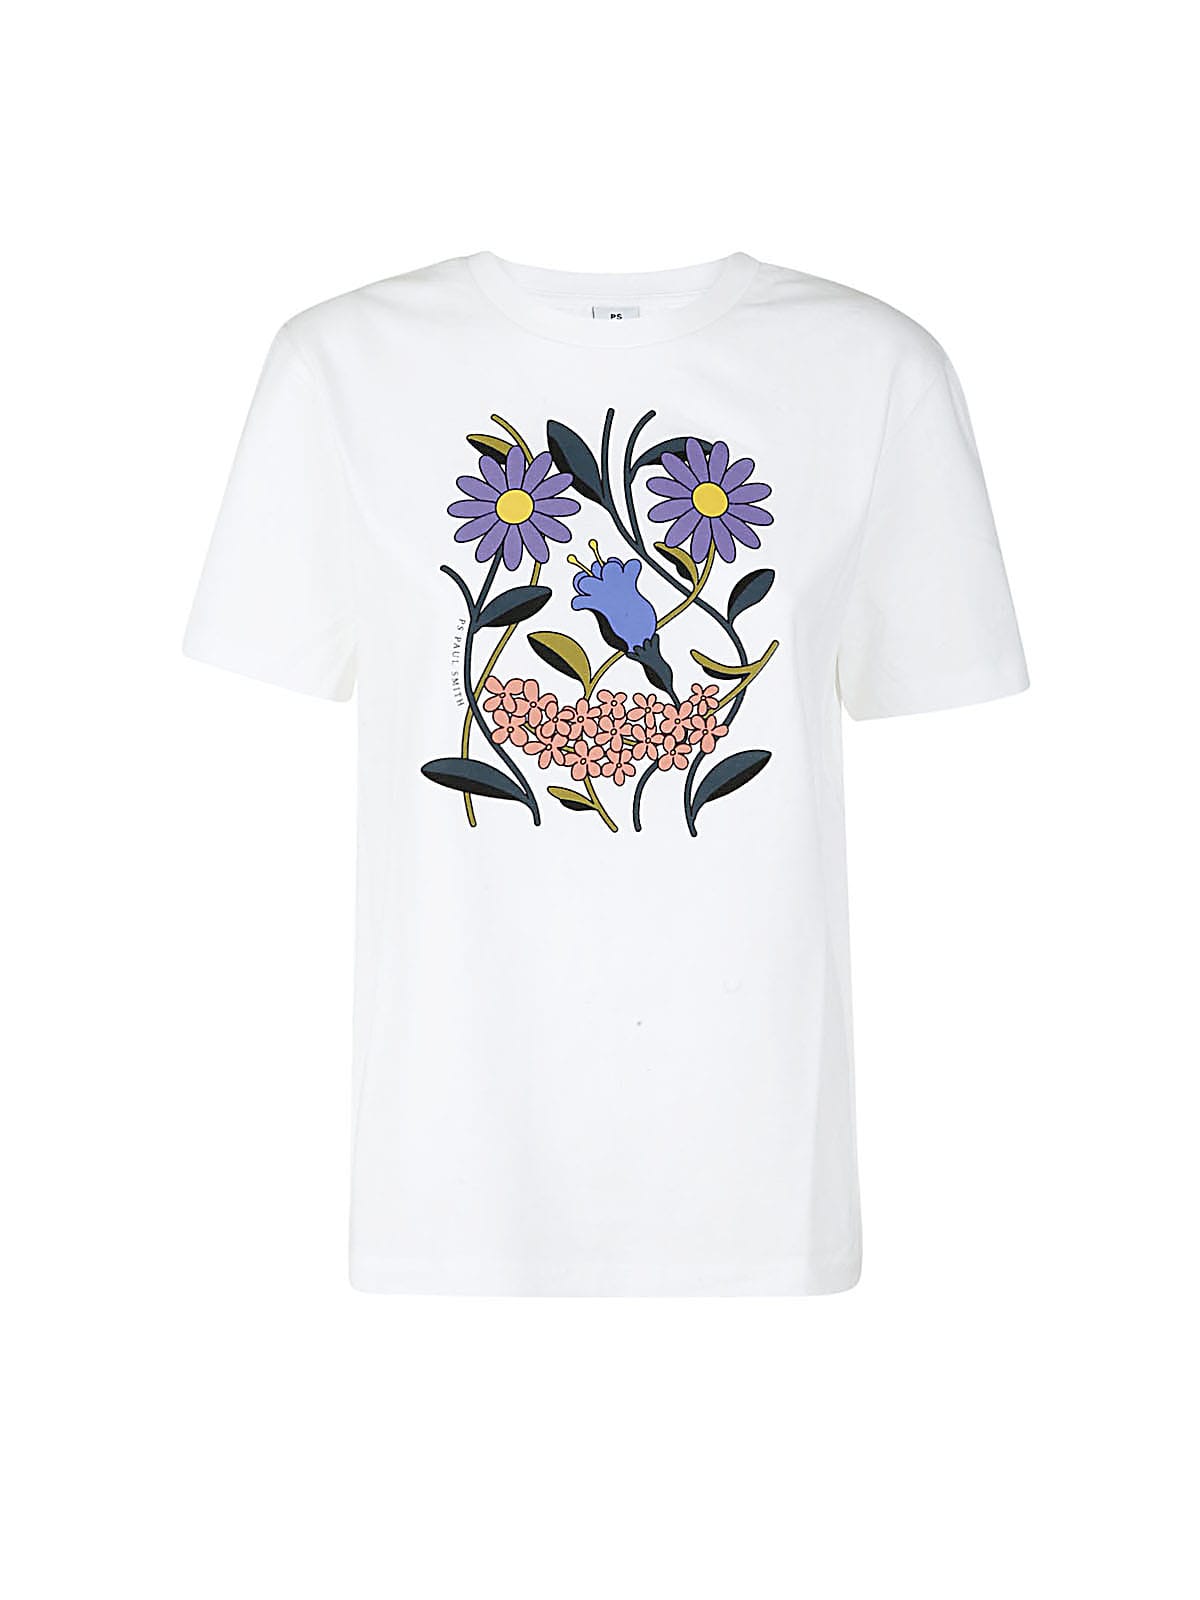 PS by Paul Smith T-shirt With Daisy